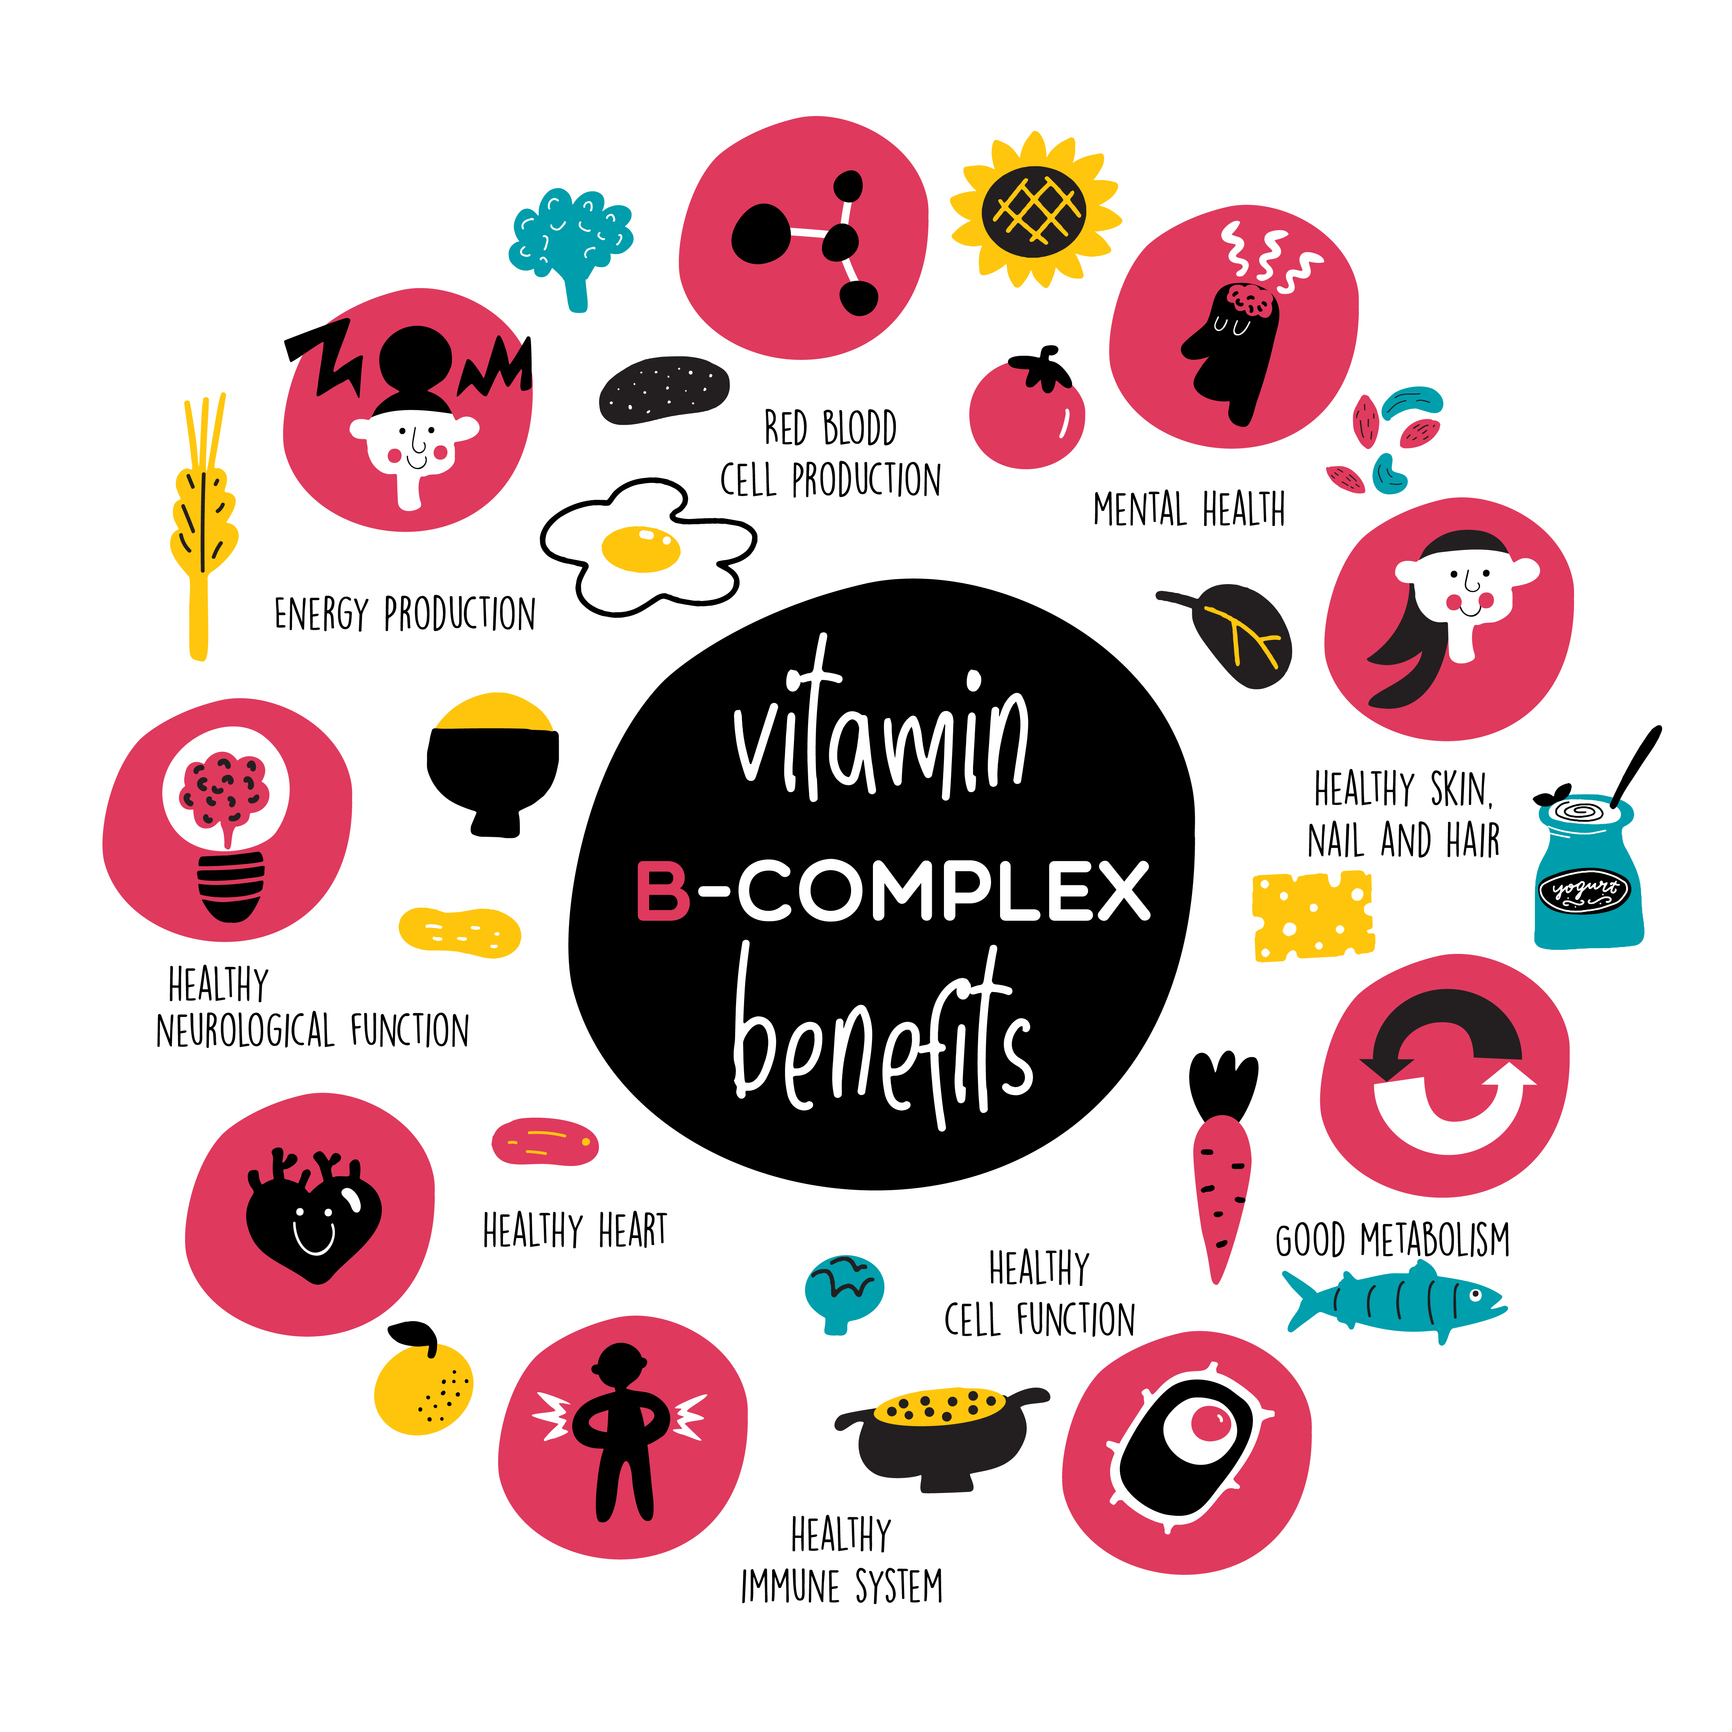 The impact of B-complex on our health - mental health, healthy skin, nails, hair, good metabolism, healthy cell function and immune system, healthy heart and nerve function, energy and red blood cell production.